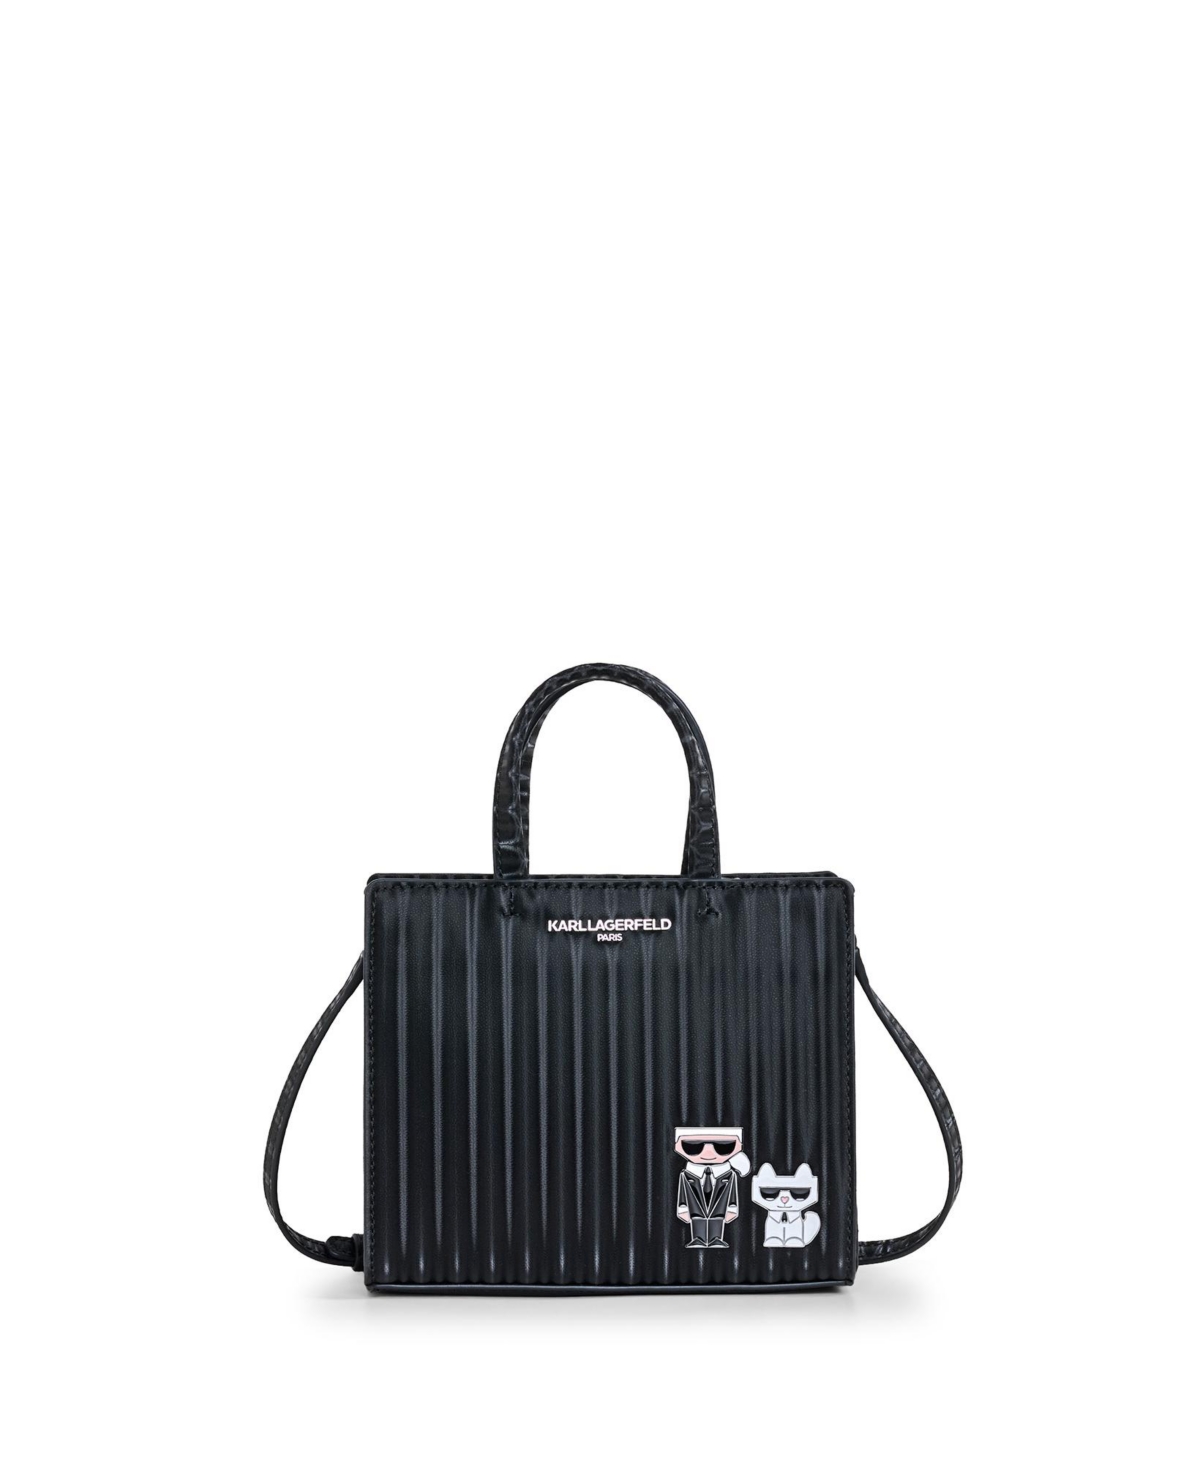 Karl Lagerfeld Karl And Choupette Maybelle Satchel In Black,silver